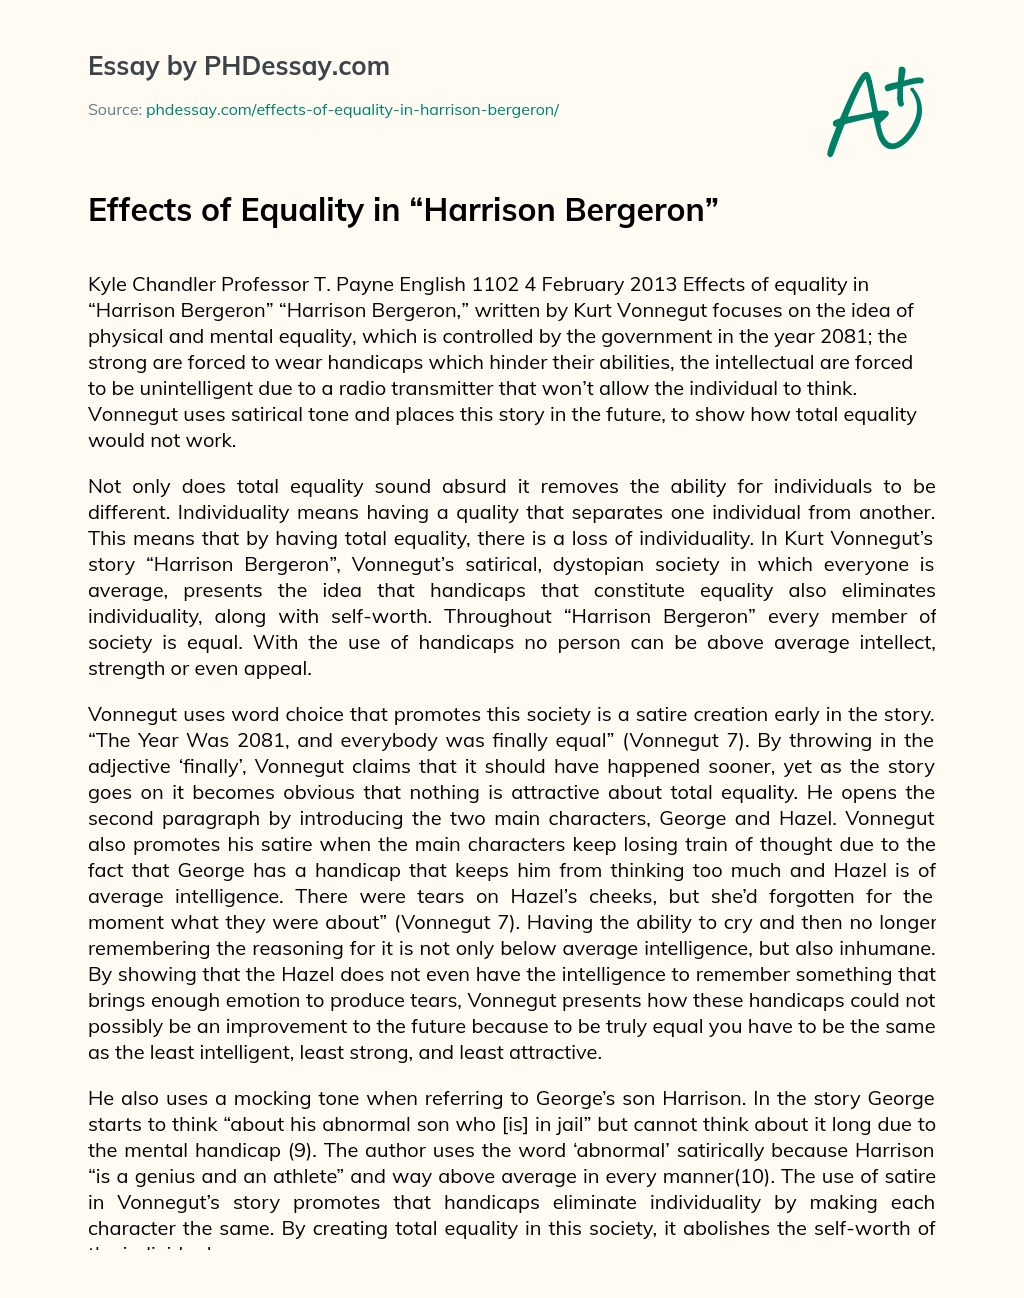 Effects of Equality in “Harrison Bergeron” essay